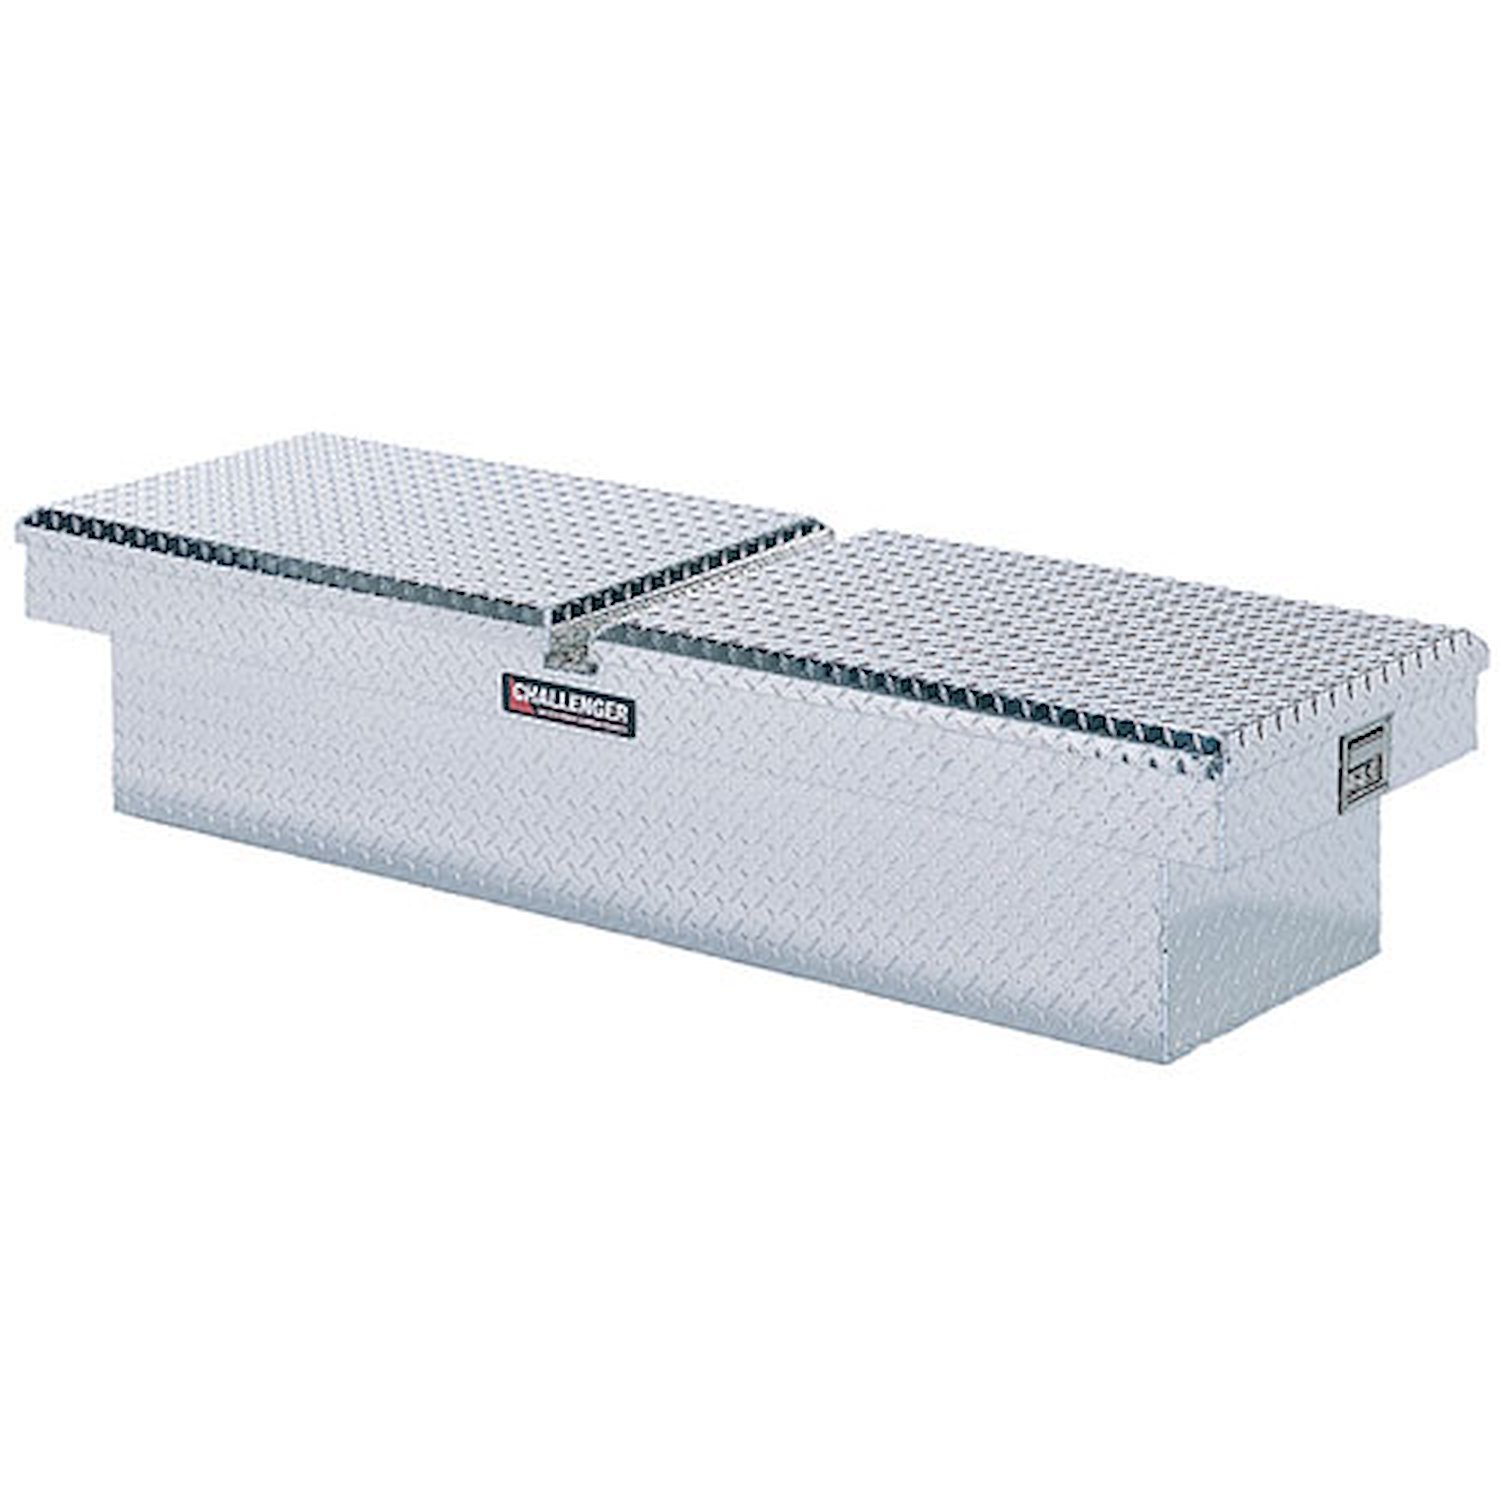 Truck Bed Challenger Tool Box Length: 63.25"